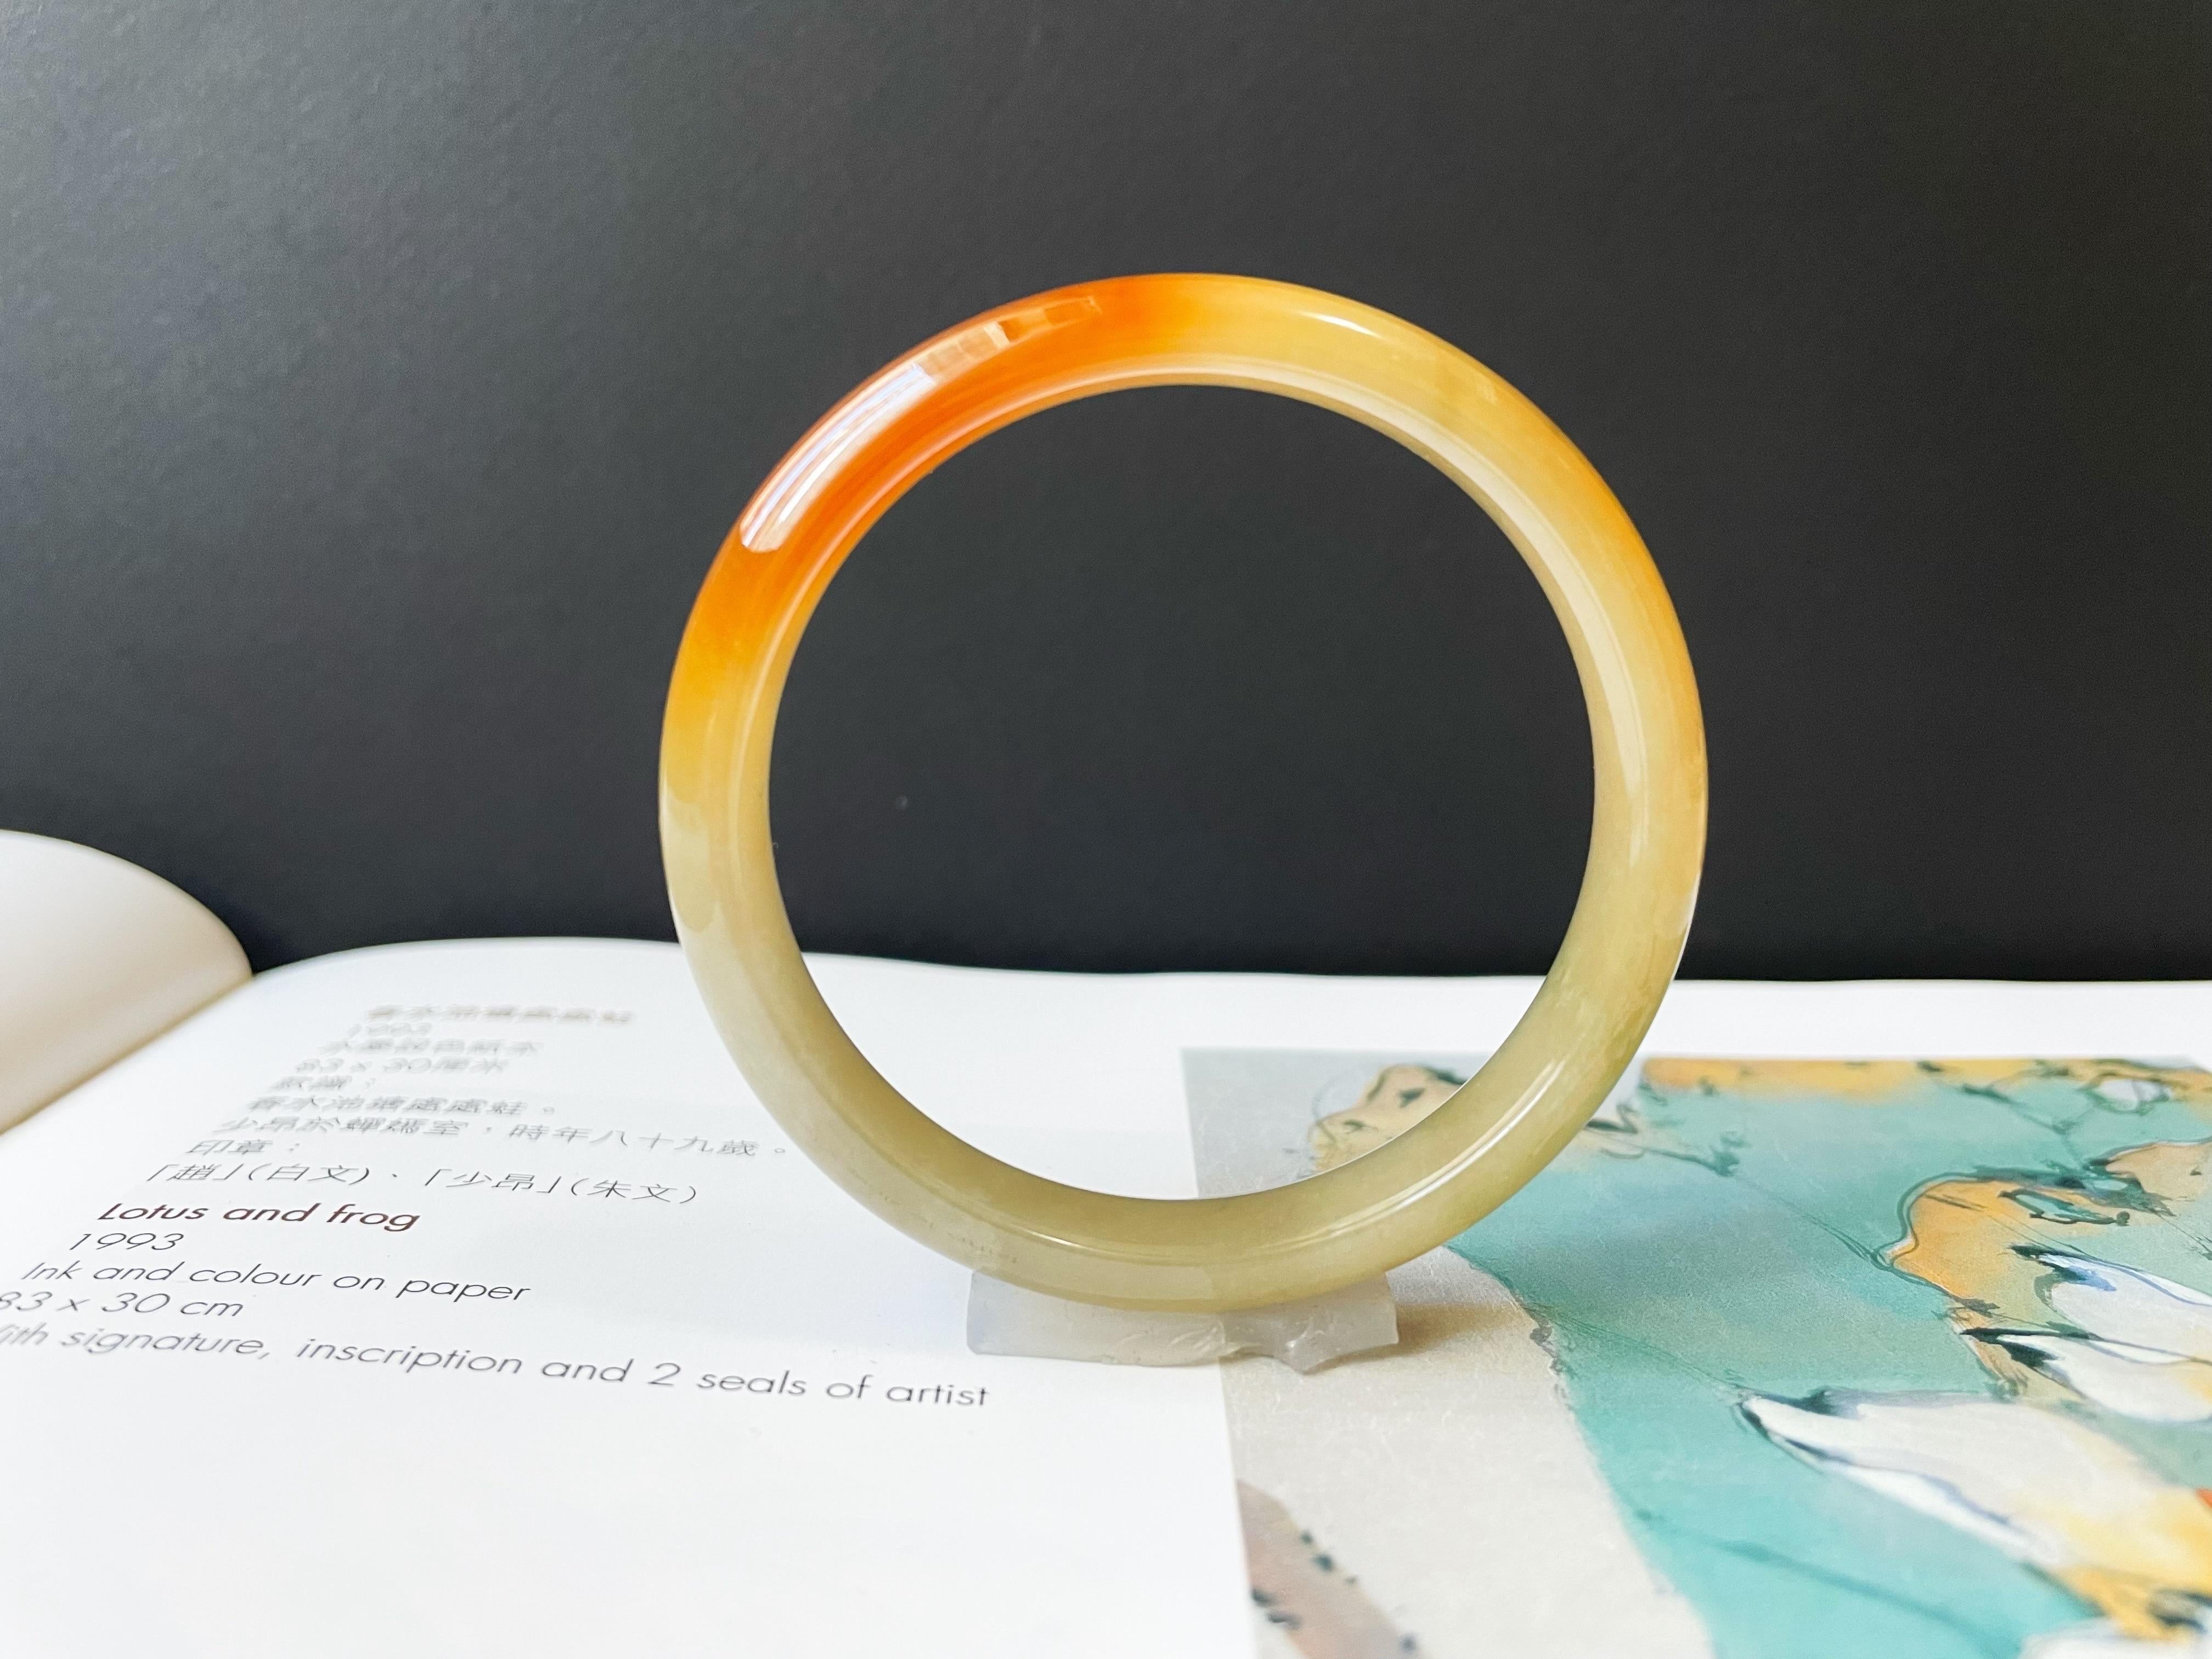 This stunning, premium Myanmar jade bangle is 100% natural, untreated and undyed Grade-A jadeite jade. This bangle is icy, watery with very fine grains, which is nothing short of magnificent. The stunning colors of yellow and red gifted by Mother